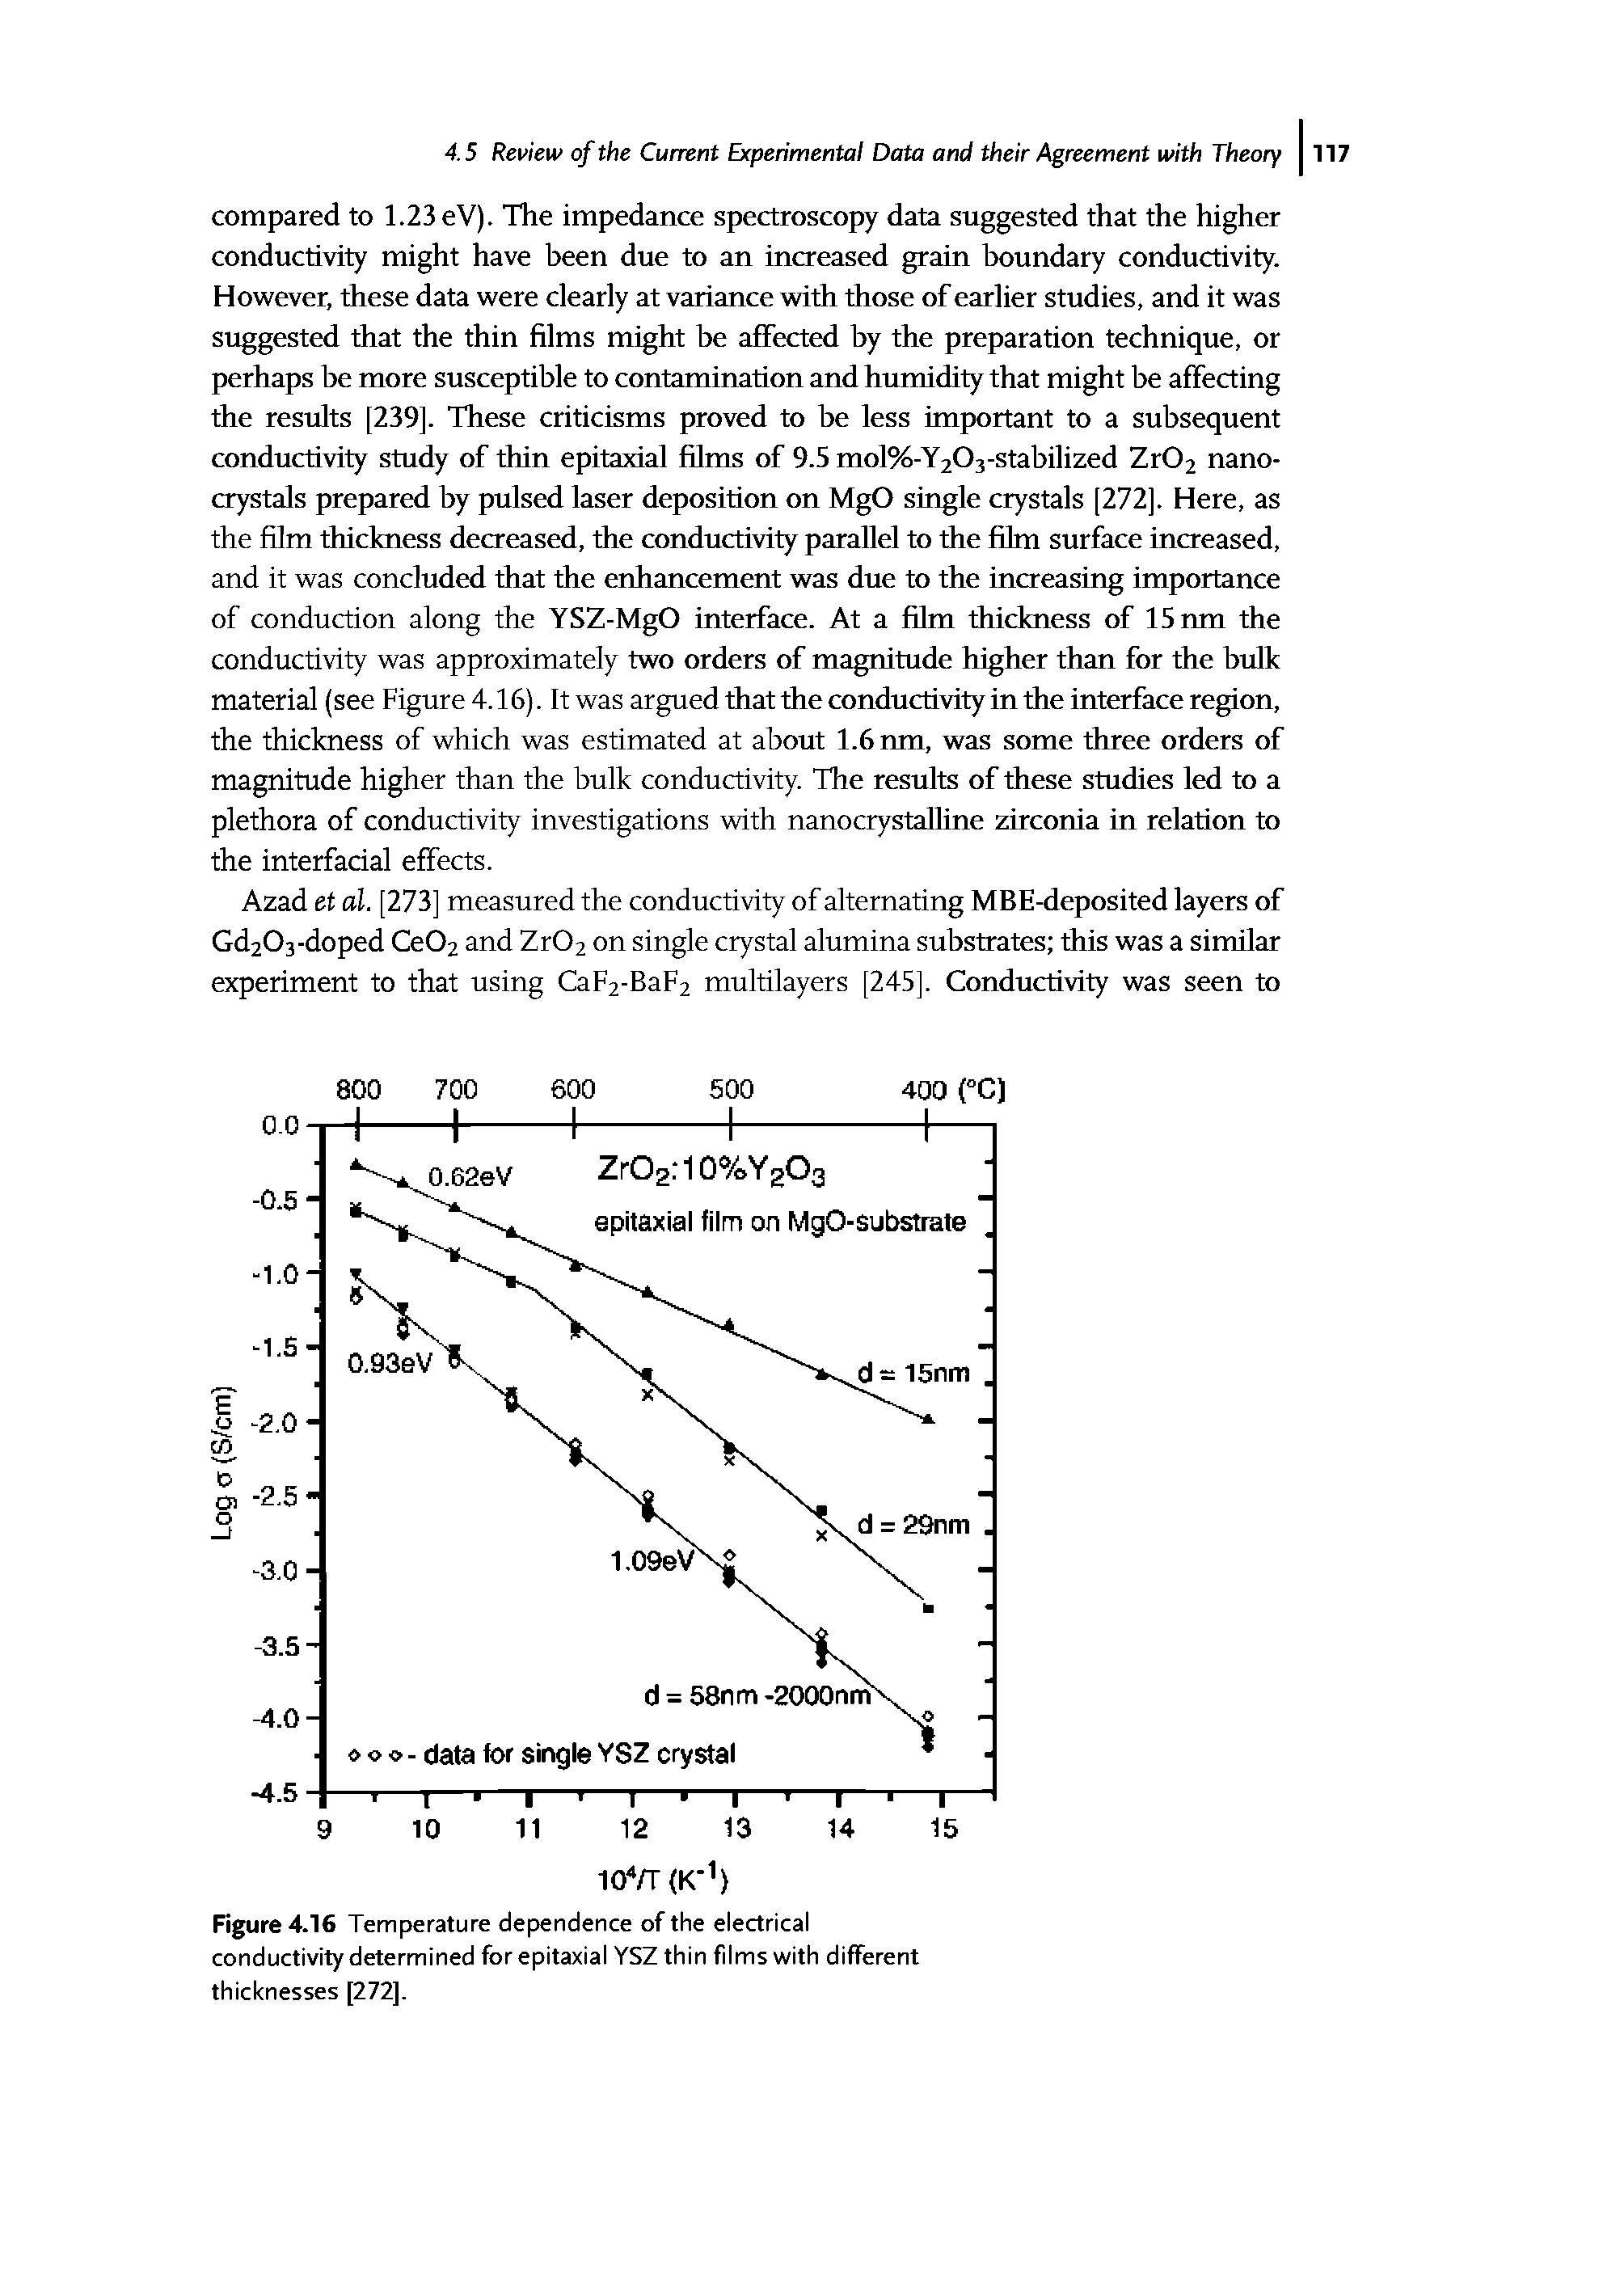 Figure 4.16 Temperature dependence of the electrical conductivity determined for epitaxial YSZ thin films with different thicknesses [272].